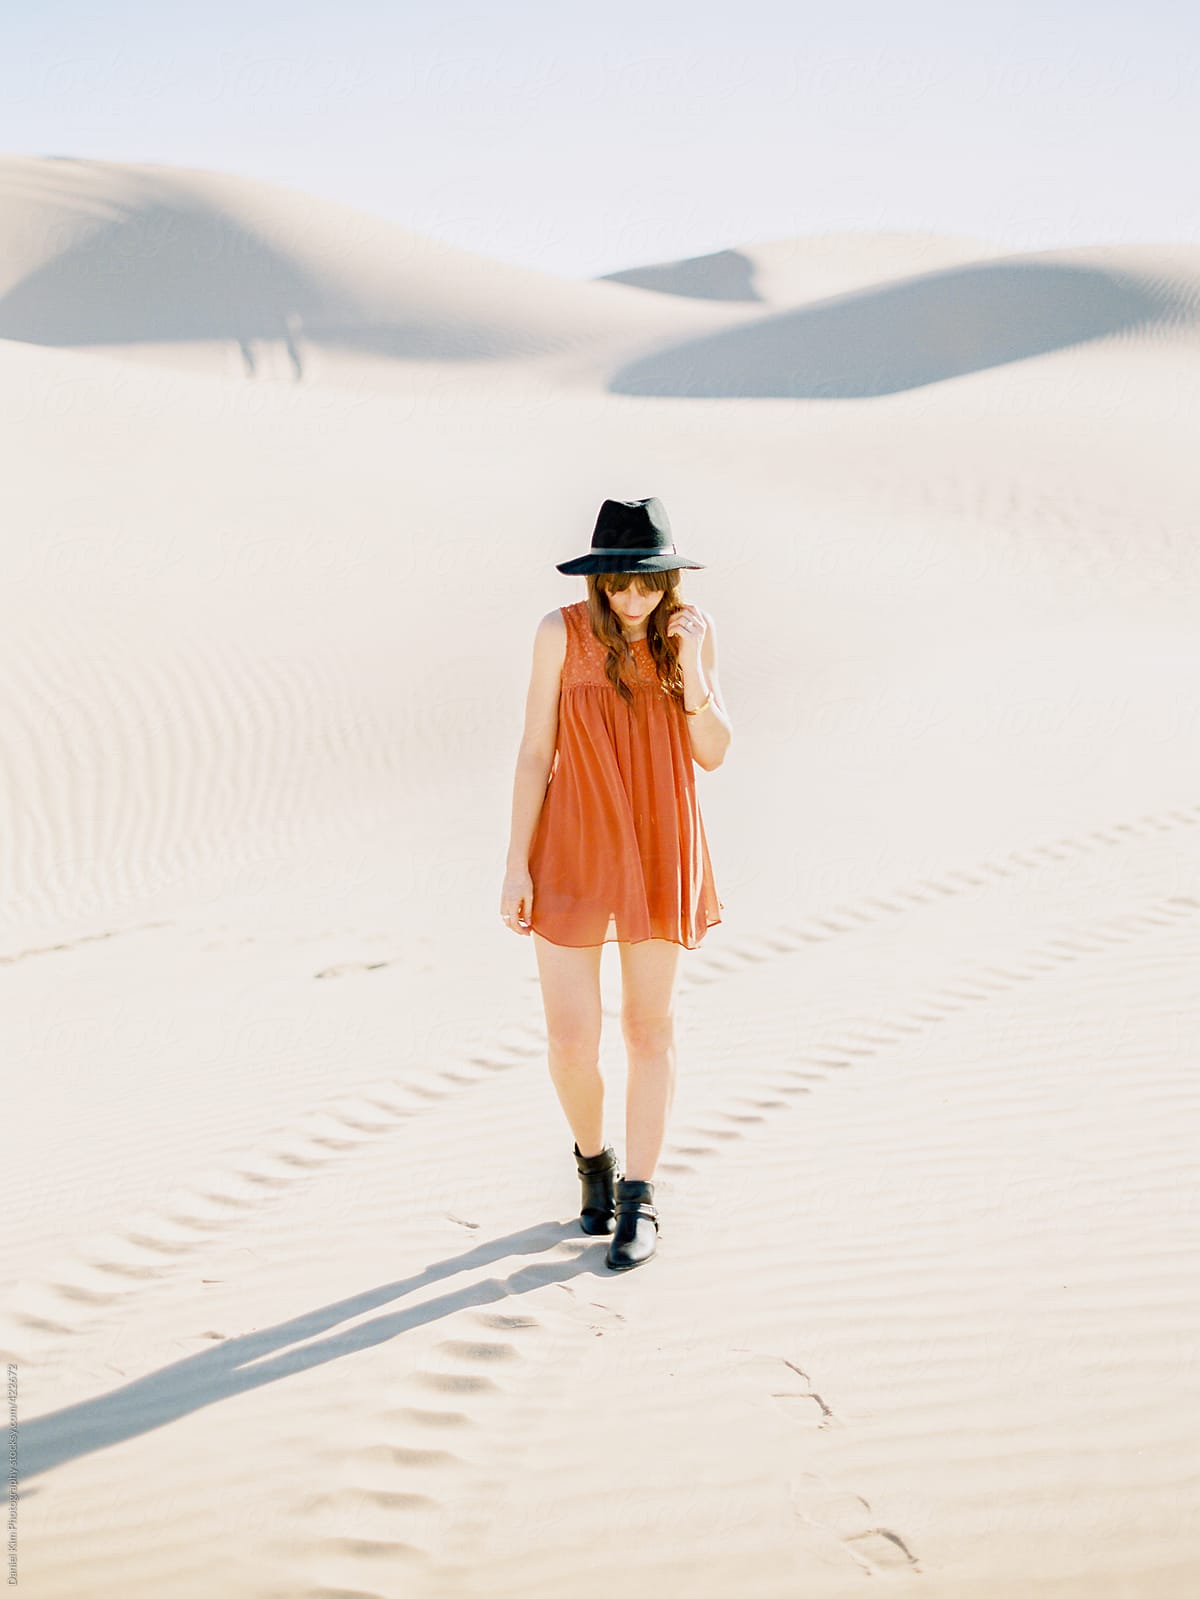 Young woman walking on sand dunes